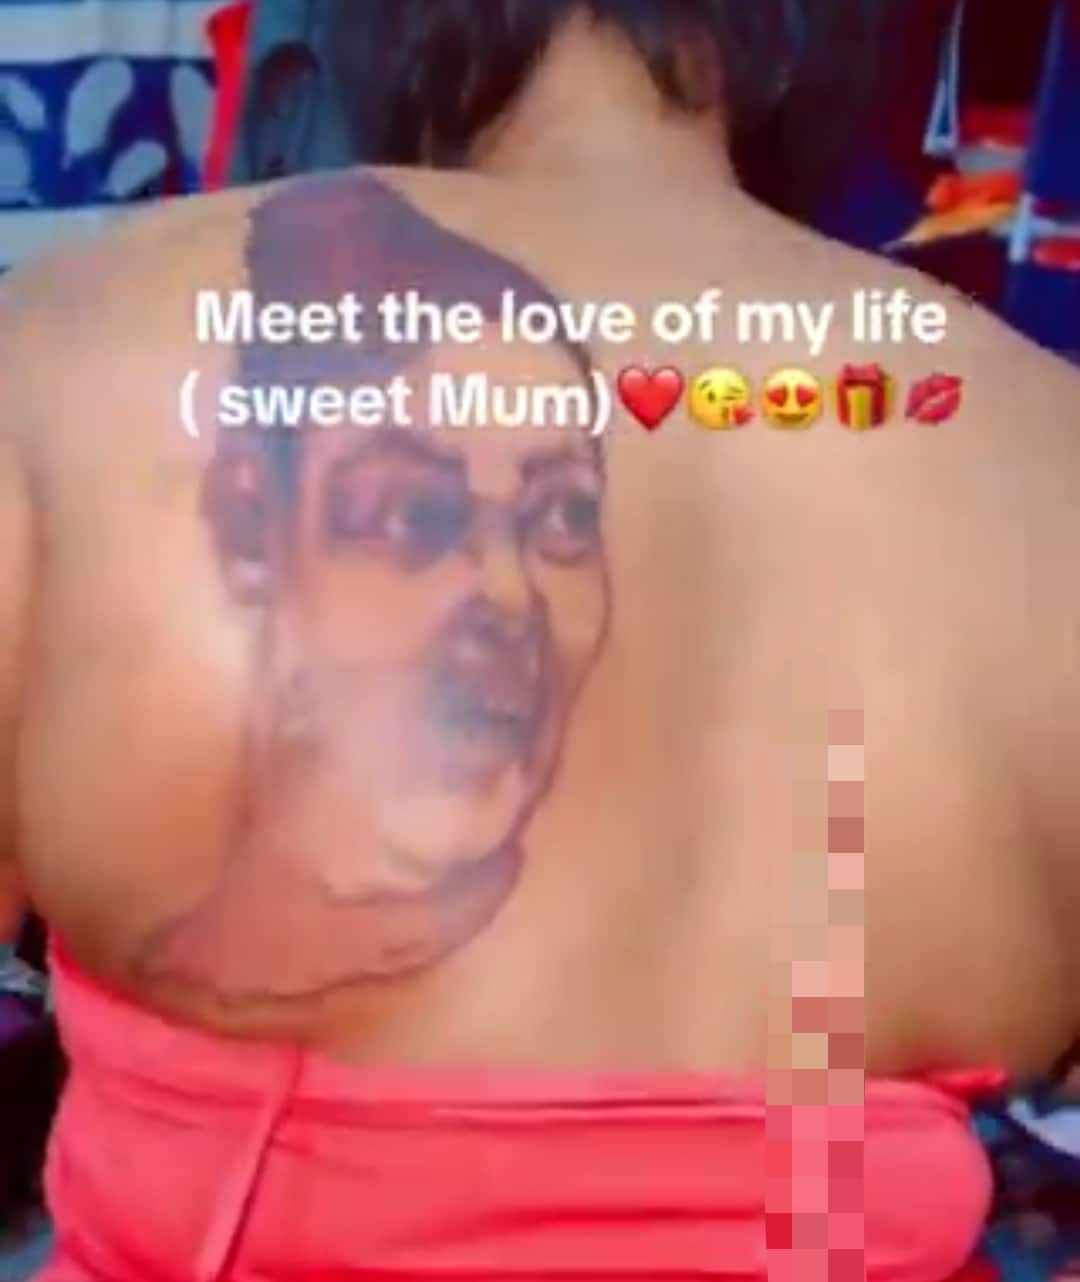 "Meet the love of my life, my sweet mum" - Ghanaian lady breaks the Internet as she dedicates tattoo to her mother